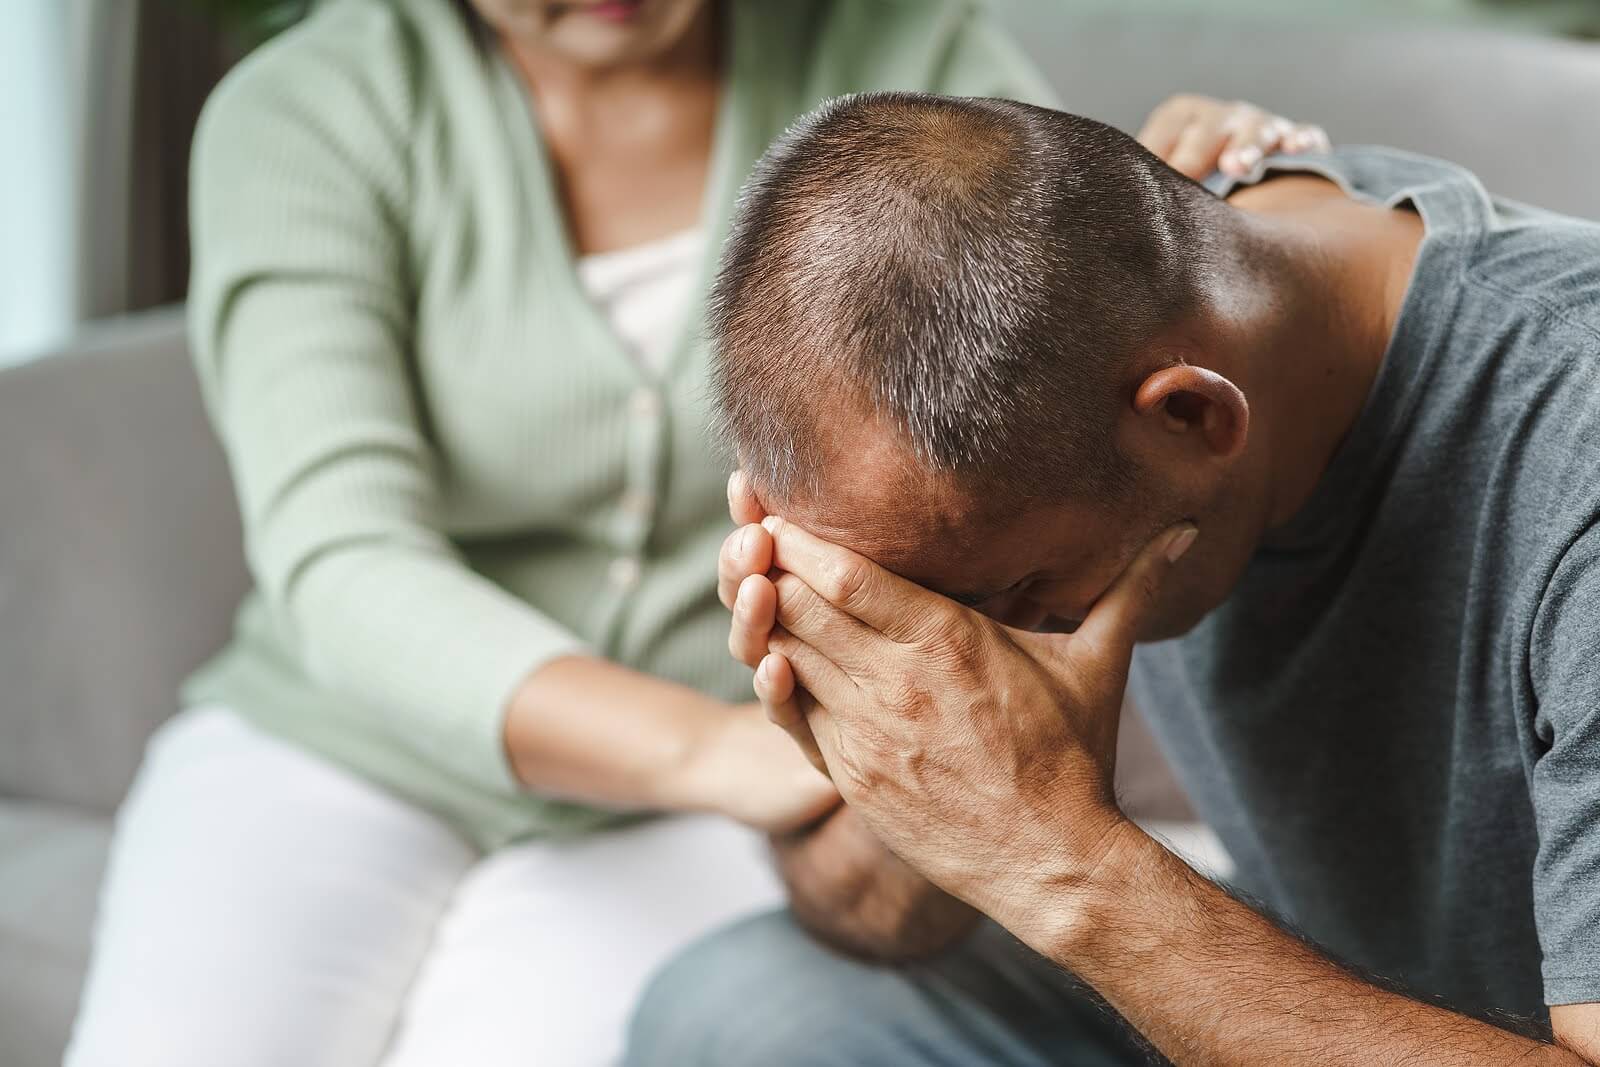 Image of a man with his head in his hands. Are you looking for "trauma therapy near me" in Houston, TX 77008? We have trauma therapists that can help you in Sugar Land, TX 77487. Start overcoming your trauma symptoms in Montrose. Call today!